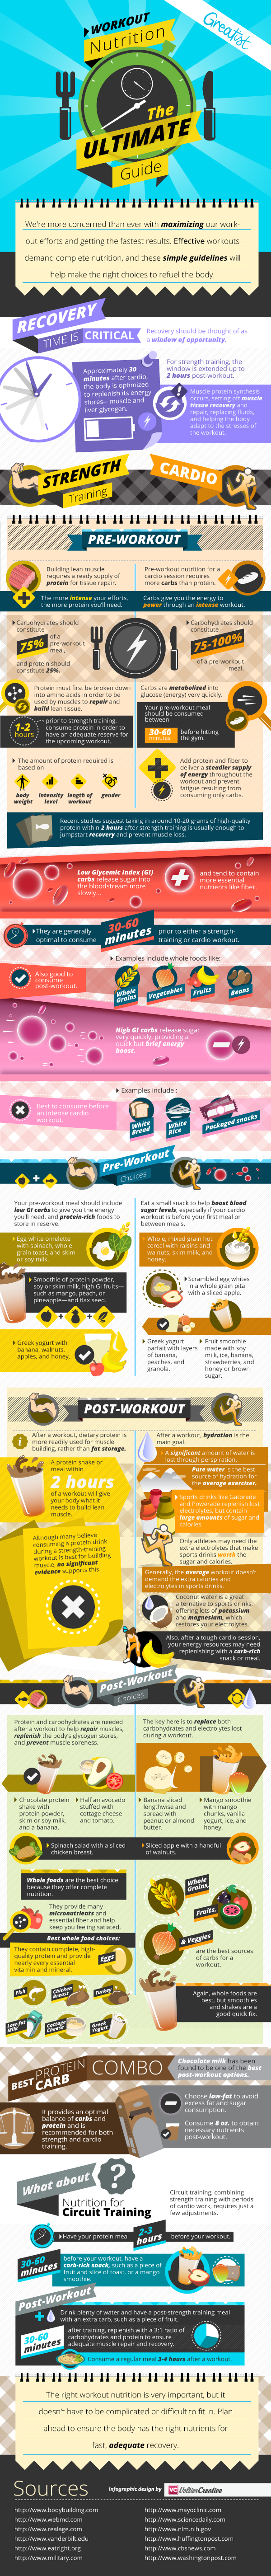 The-Complete-Guide-to-Workout-Nutrition